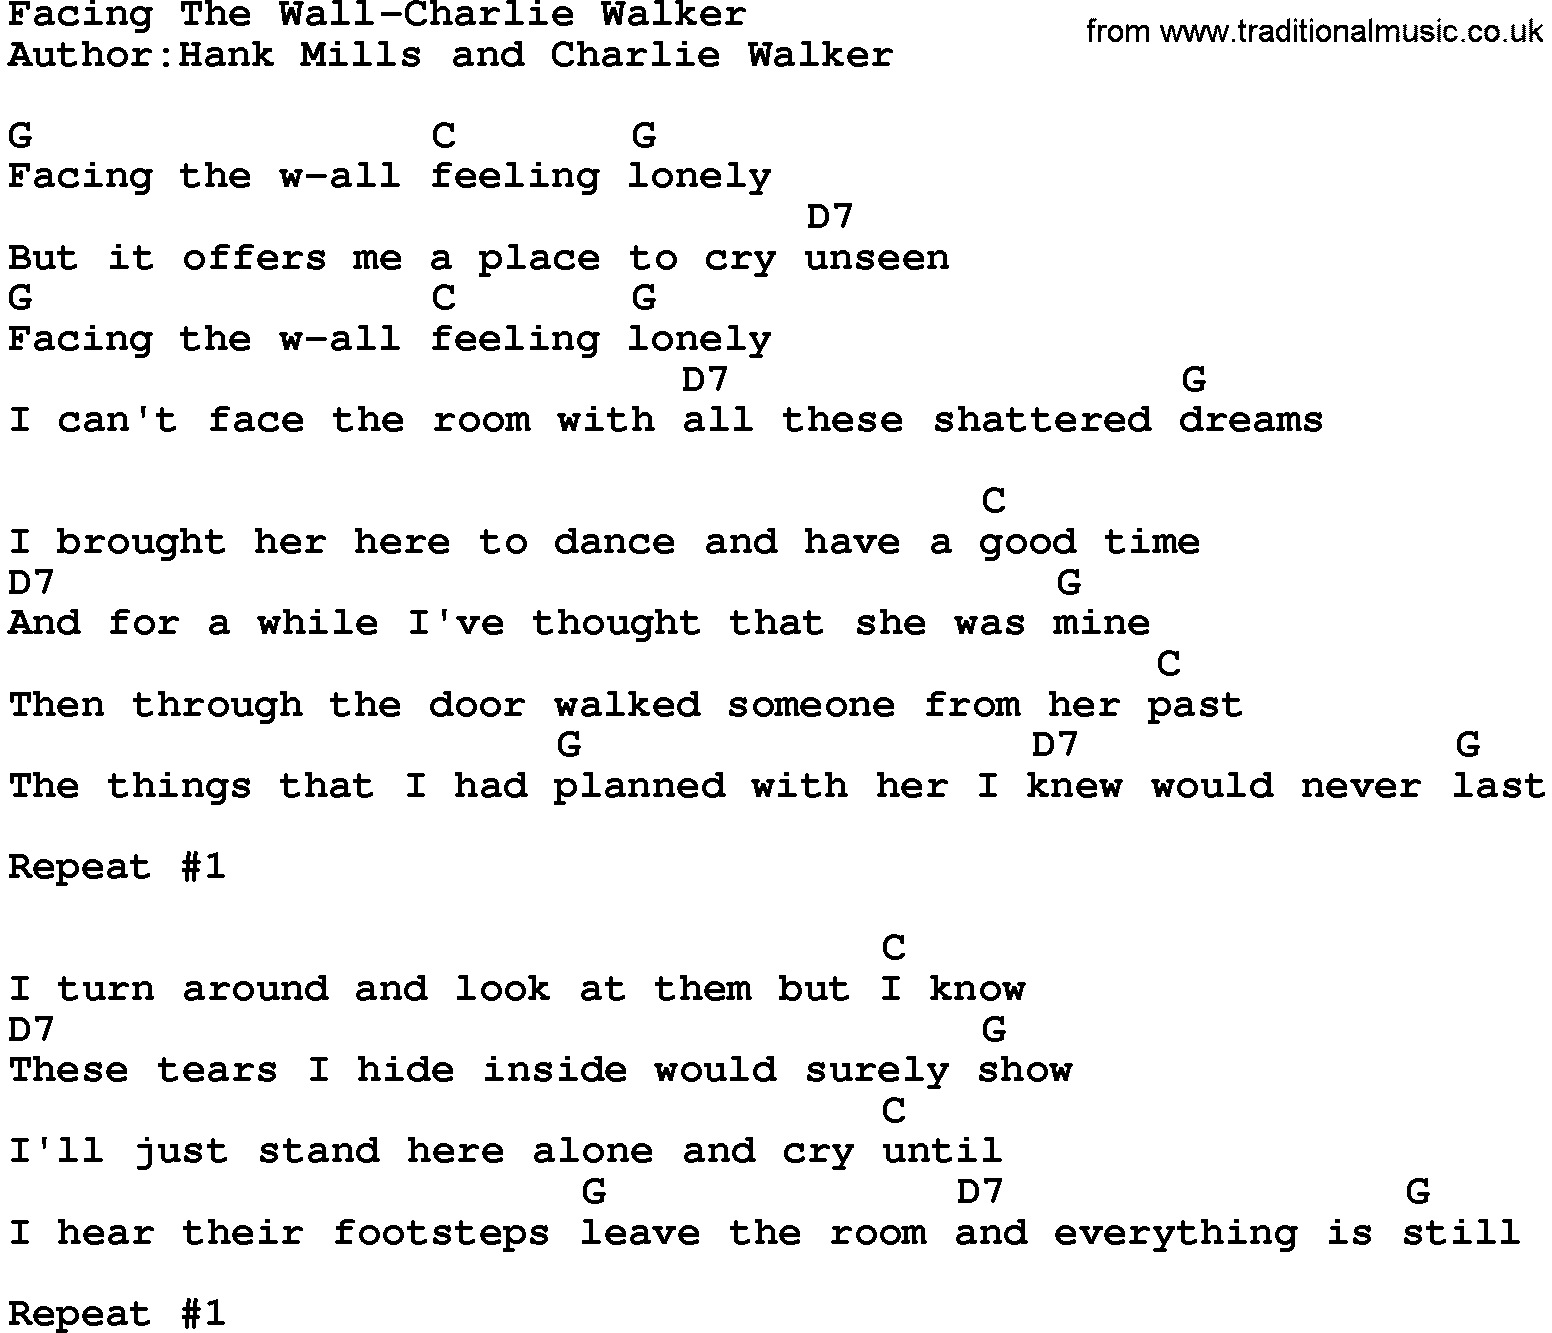 Country music song: Facing The Wall-Charlie Walker lyrics and chords